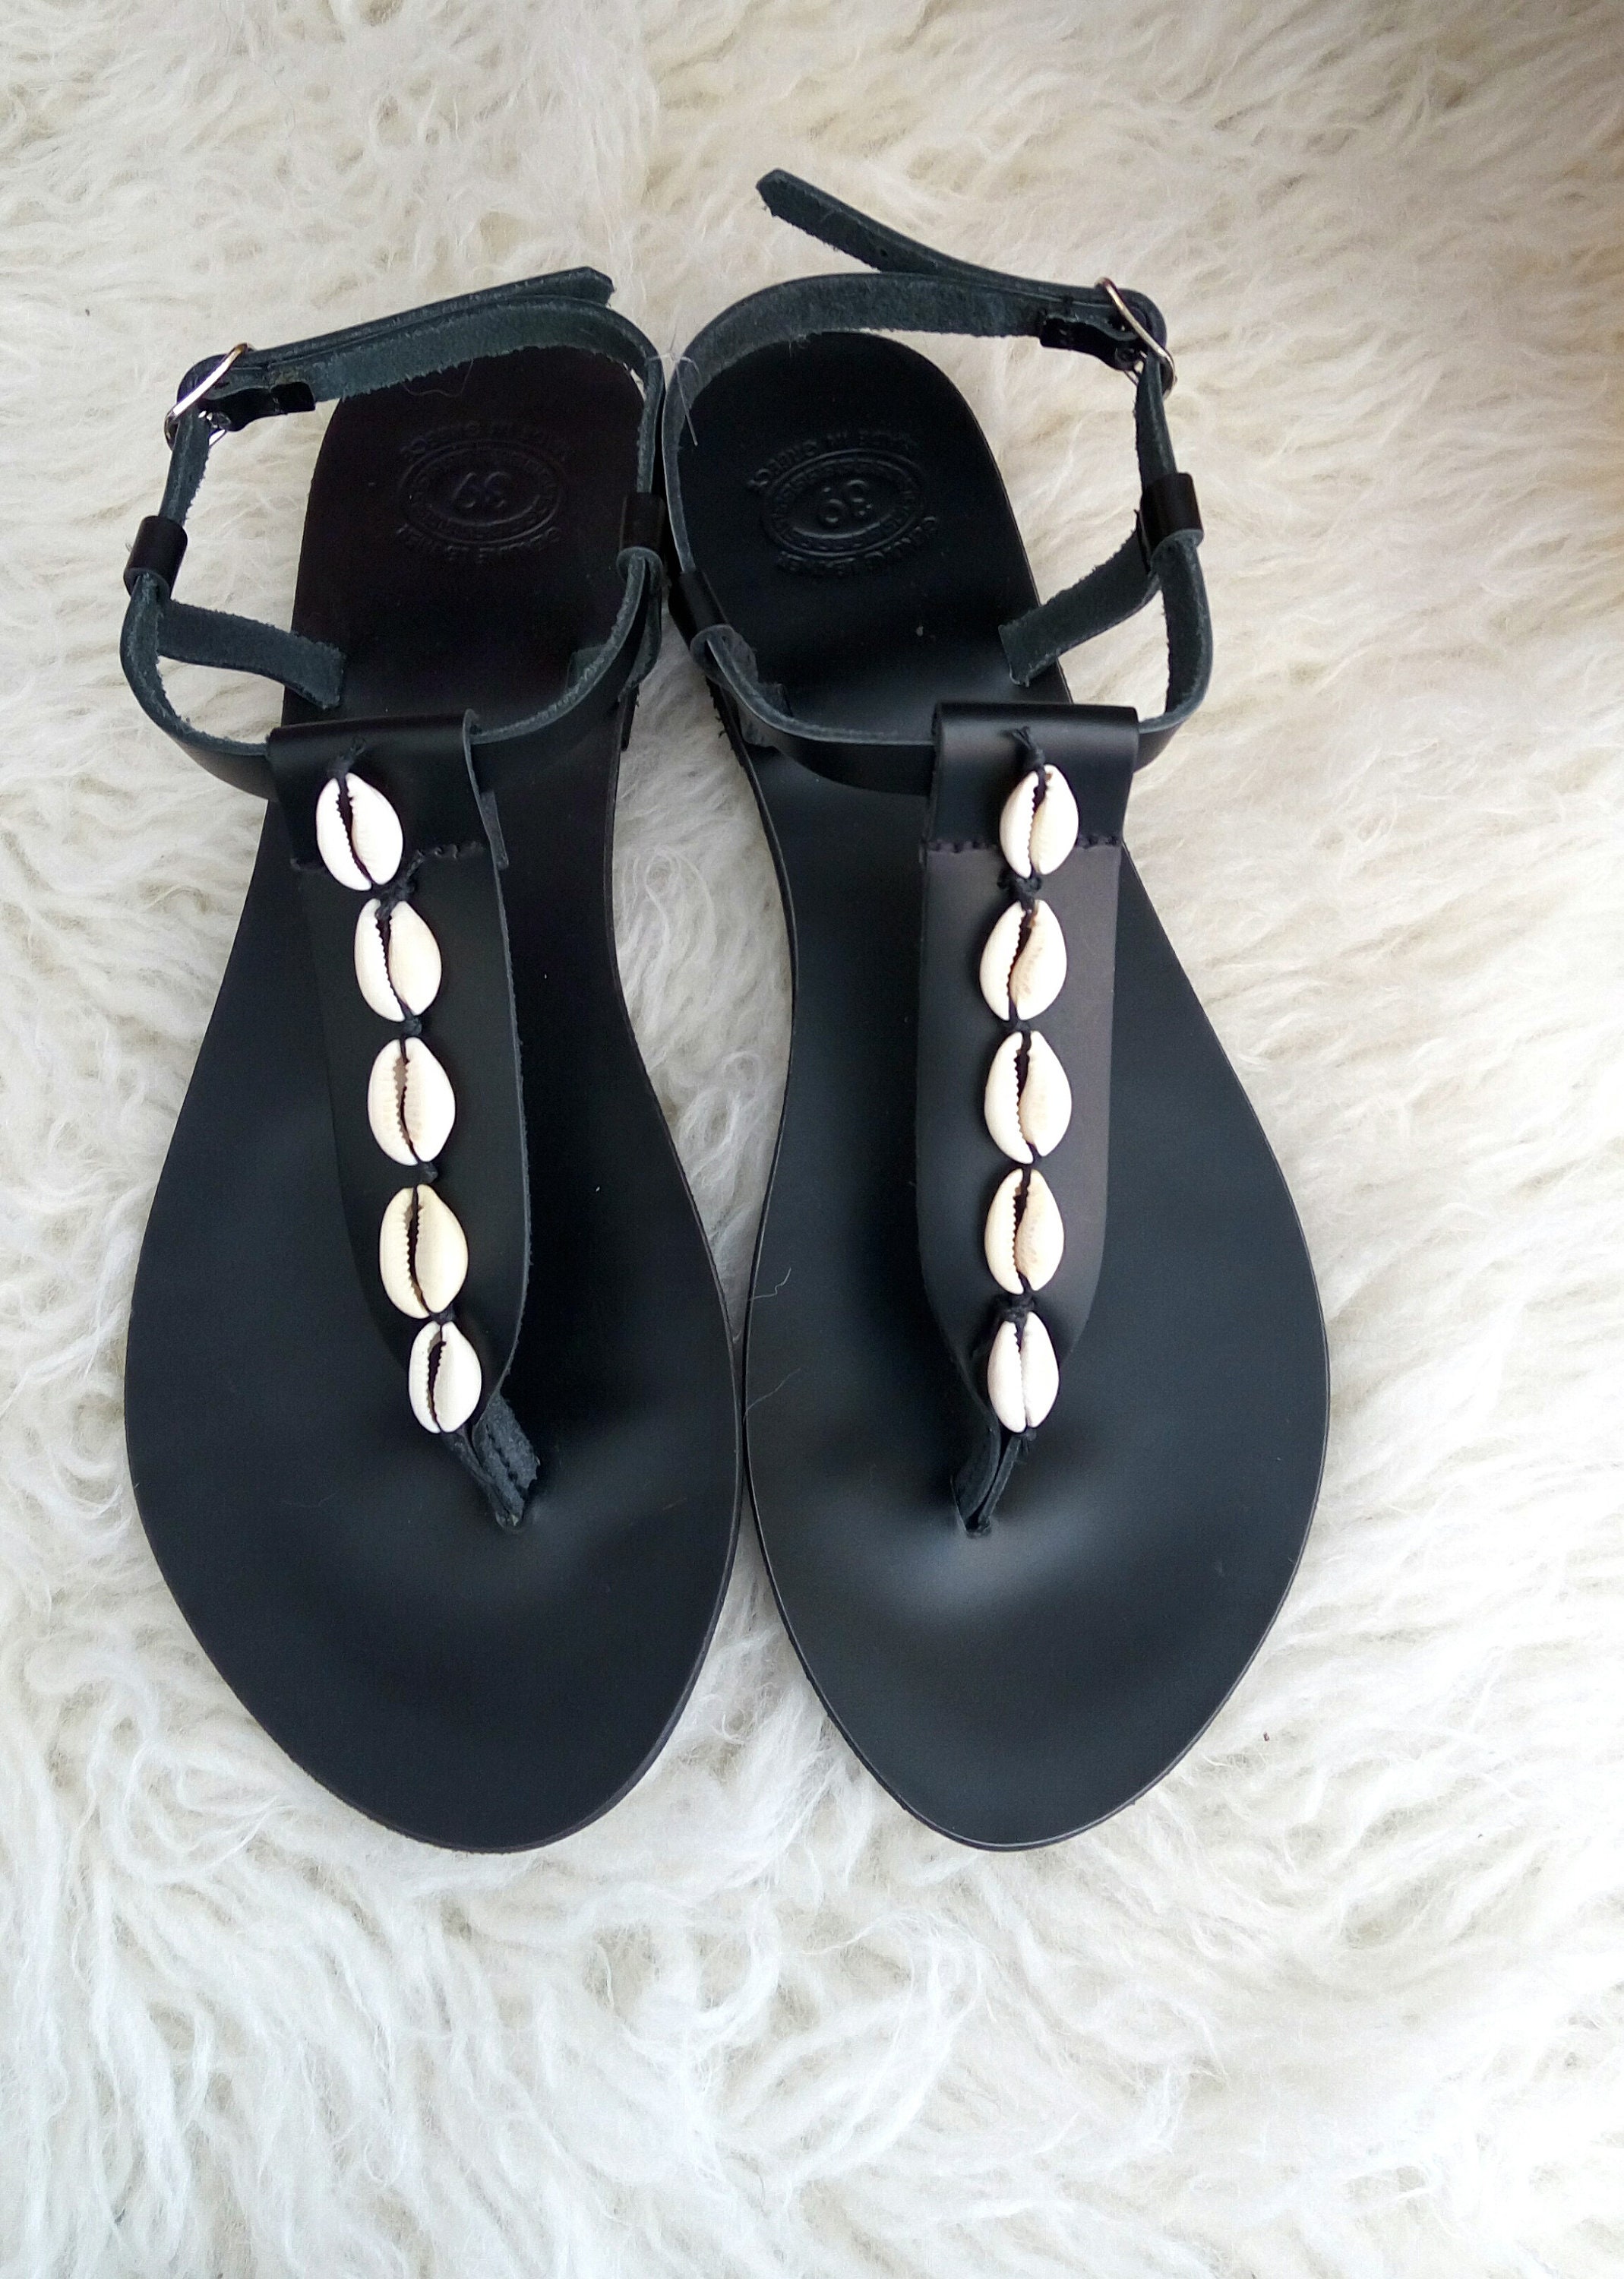 Black sandals with sea shells, Greek leather sandals, Cowrie shells ...